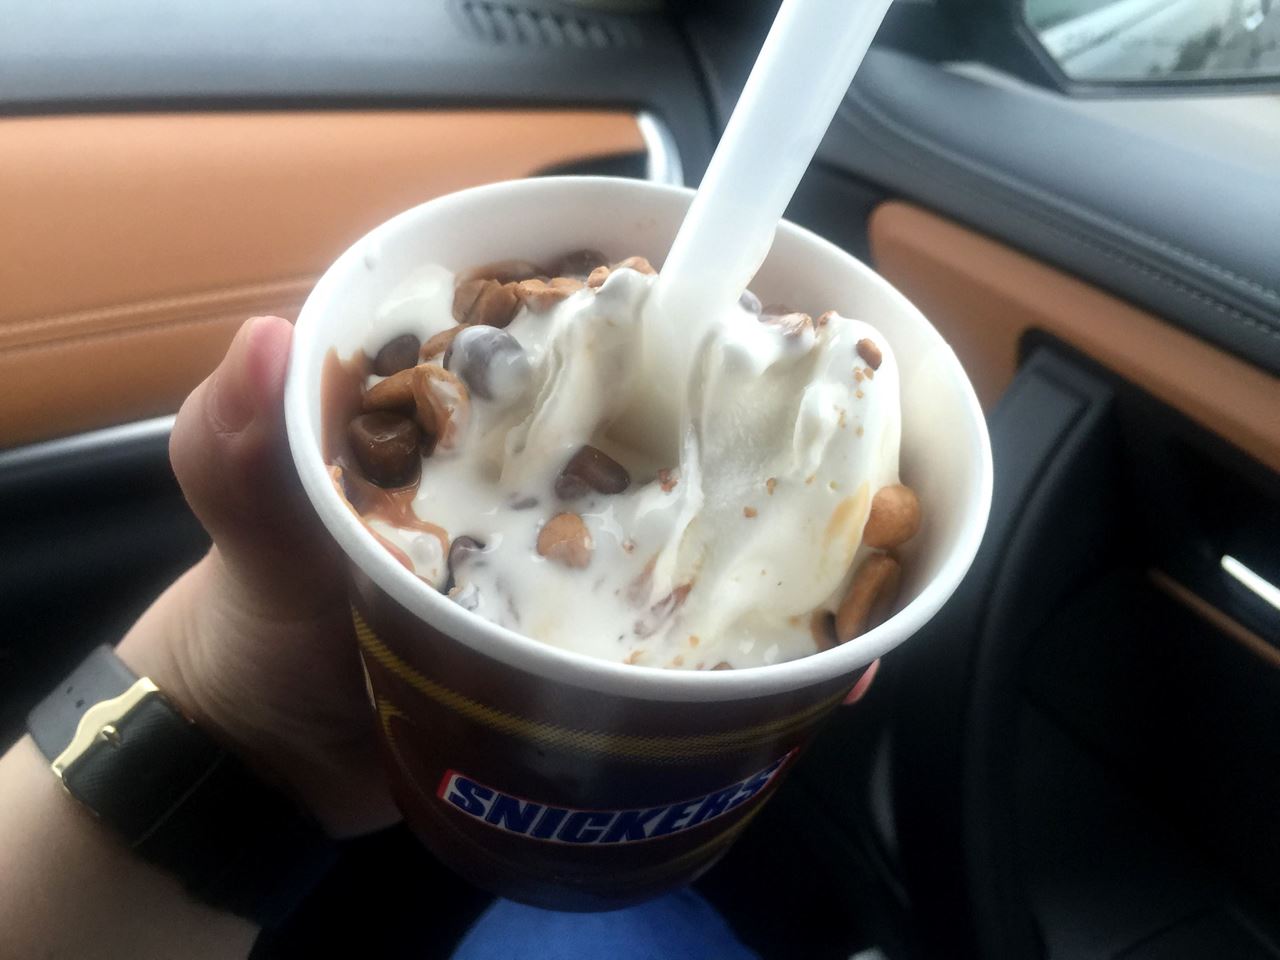 Snickers McFlurry from McDonald's ... perfect